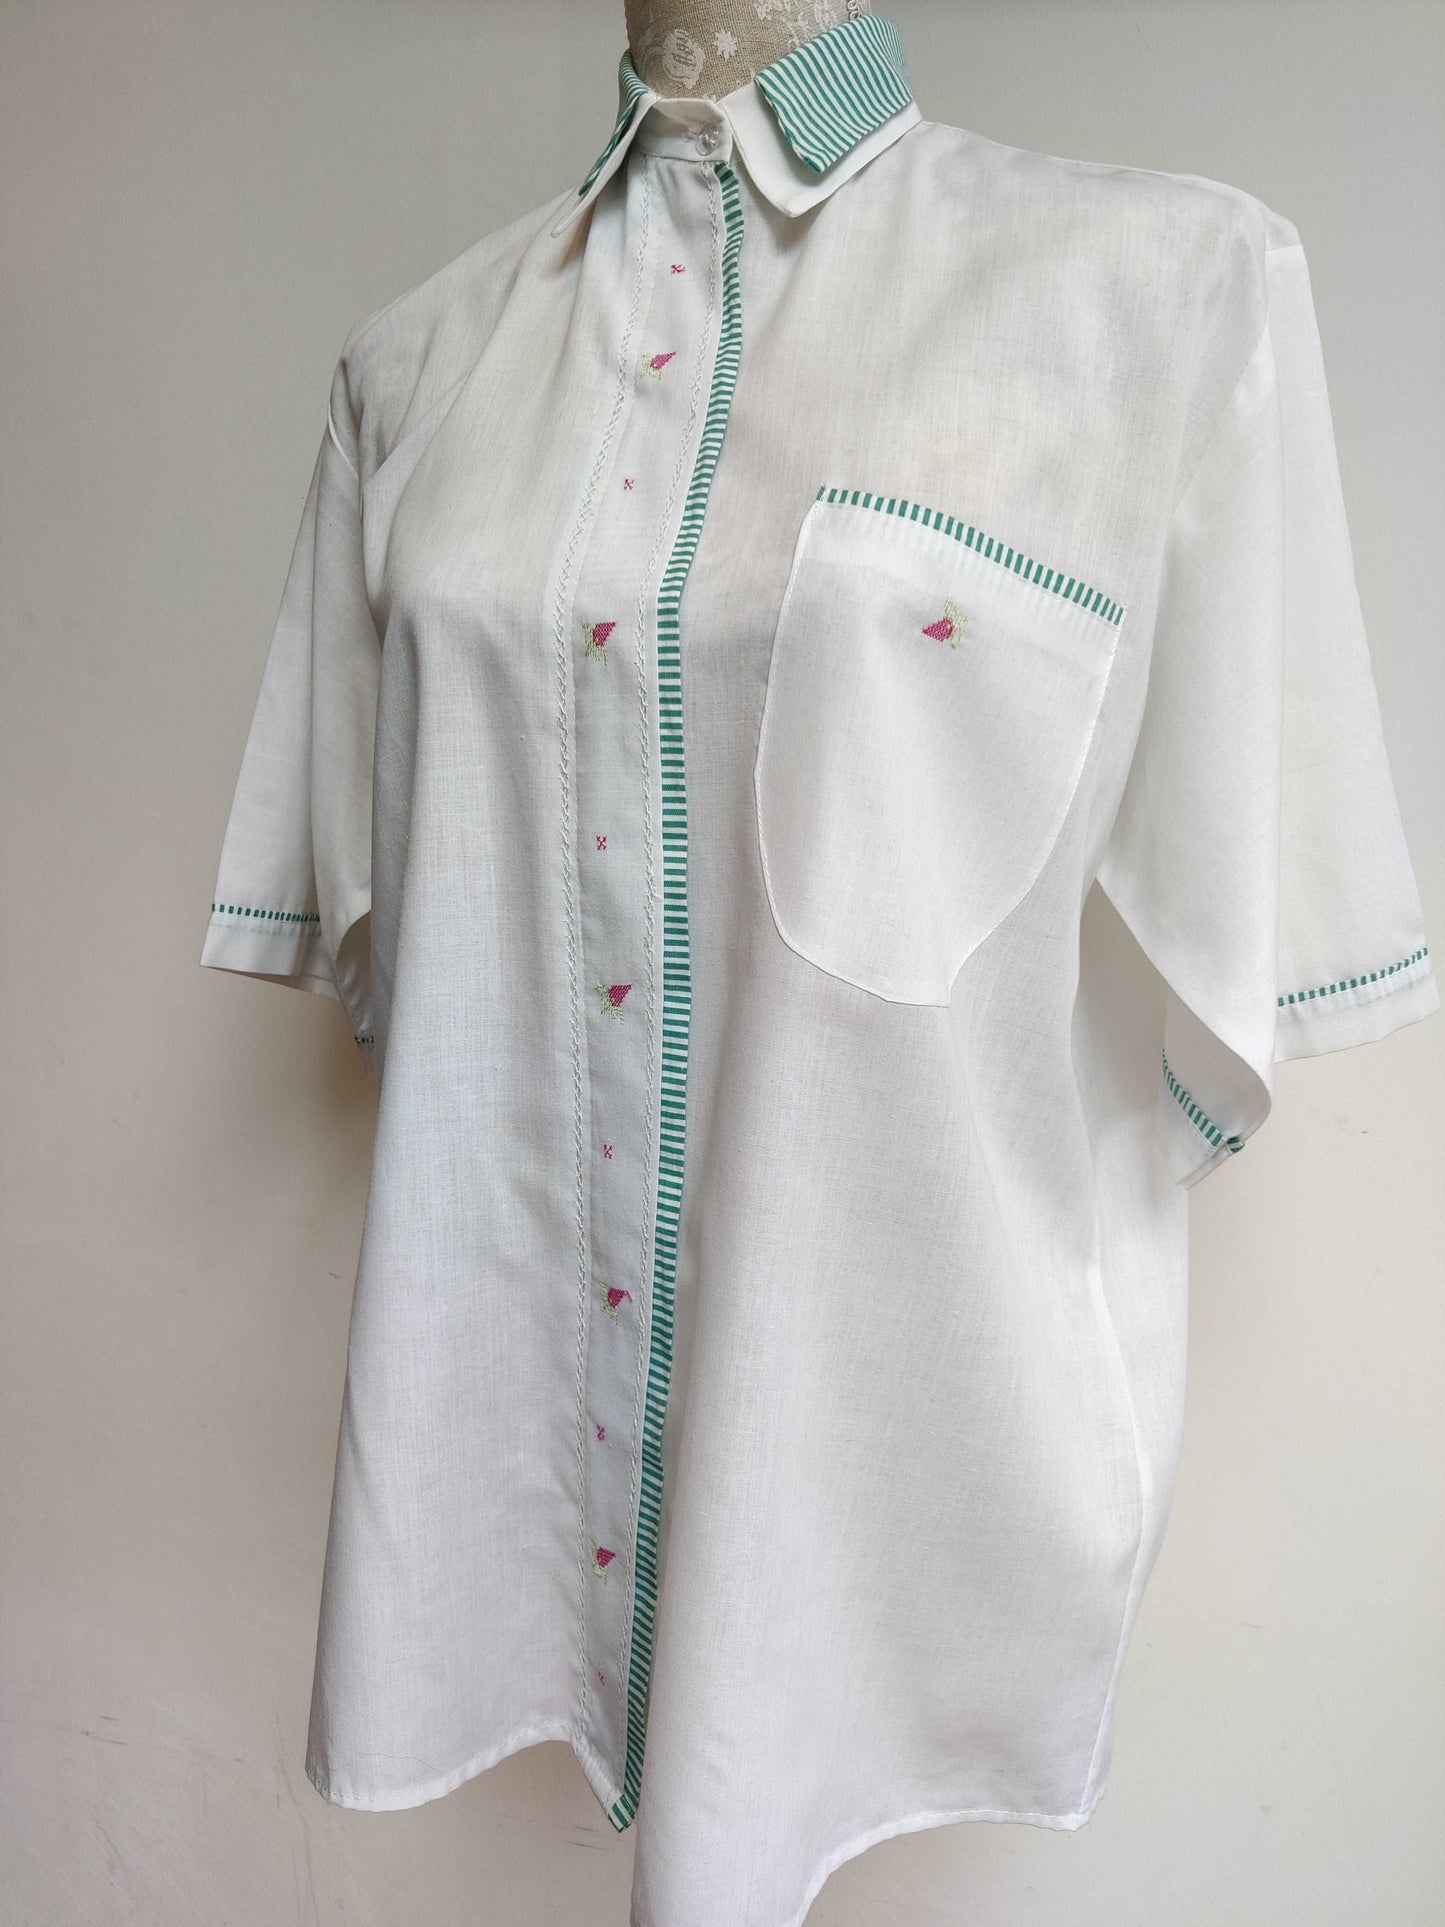 Vintage white shirt with cross stitch detail. 16-18